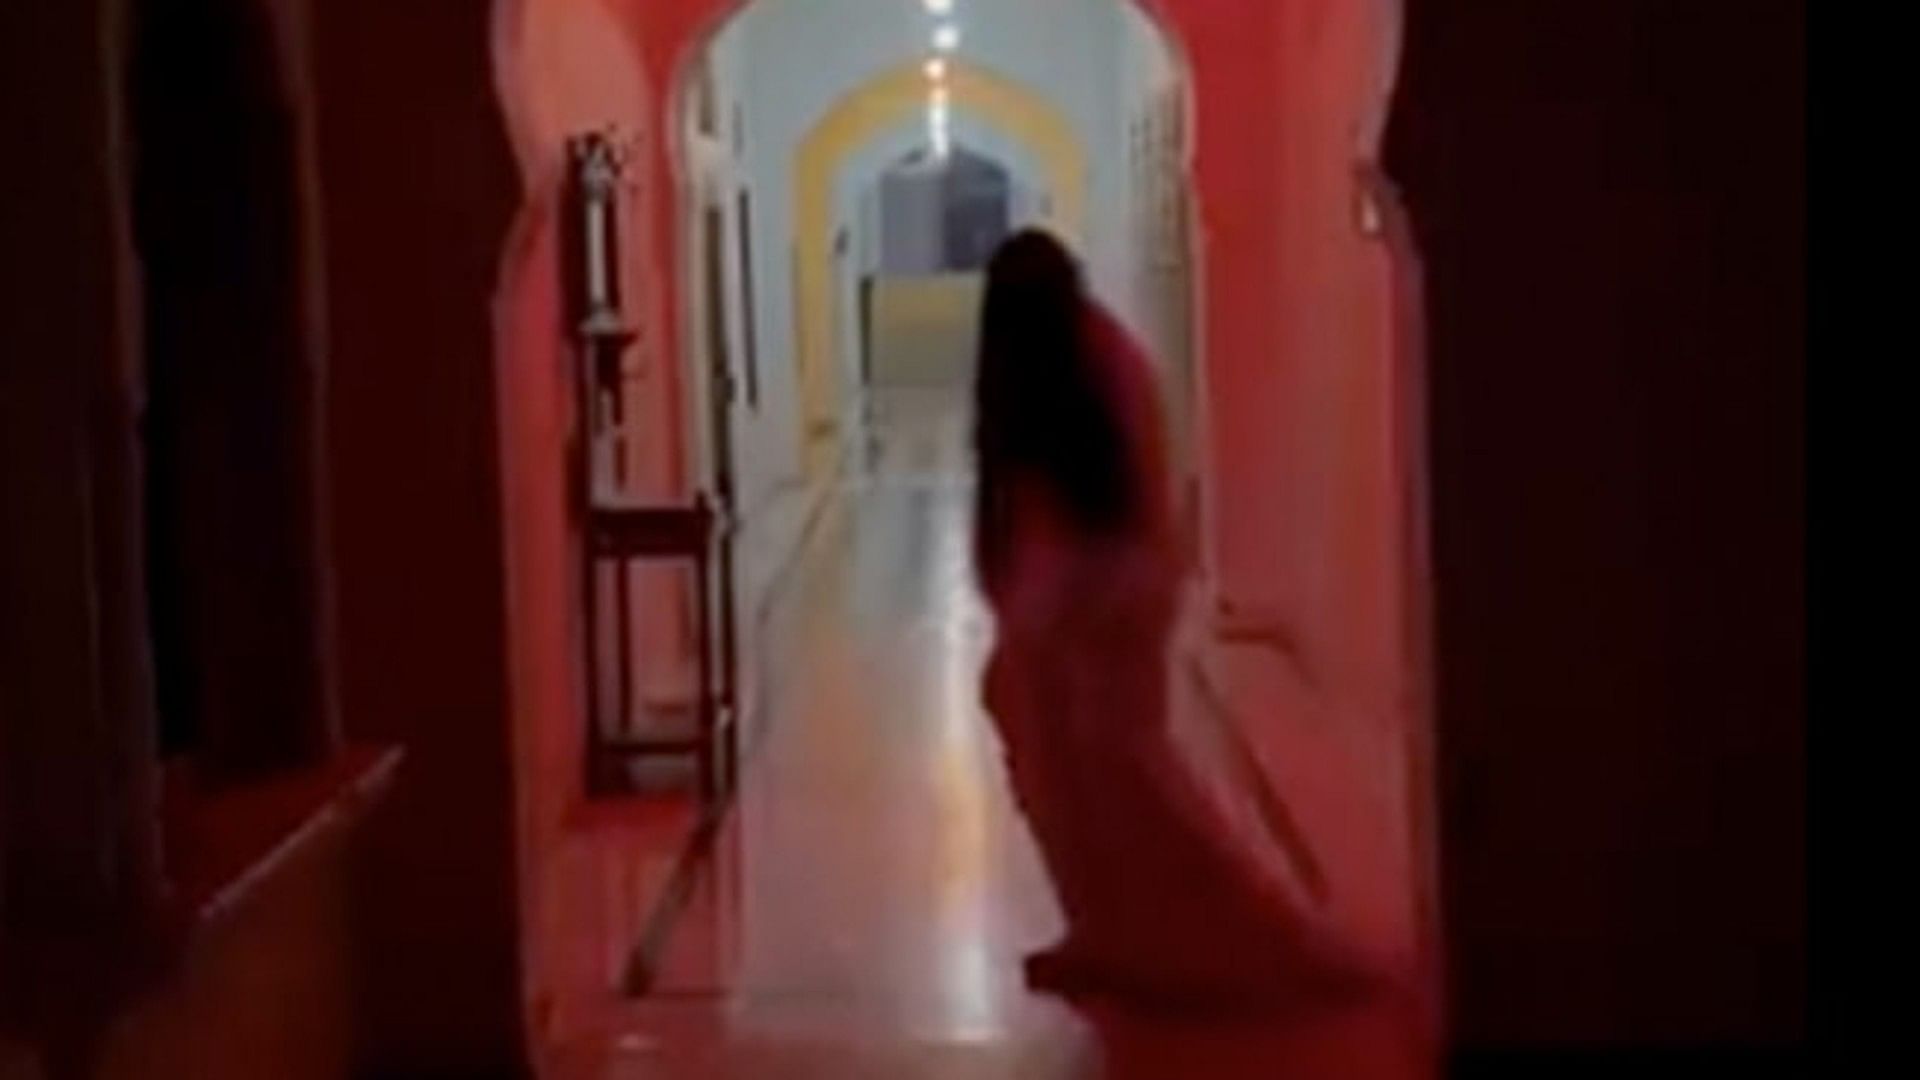 Viral Video: woman dressed as monjulika from bhool bhulaiyaa to scare people at a haveli in rajasthan